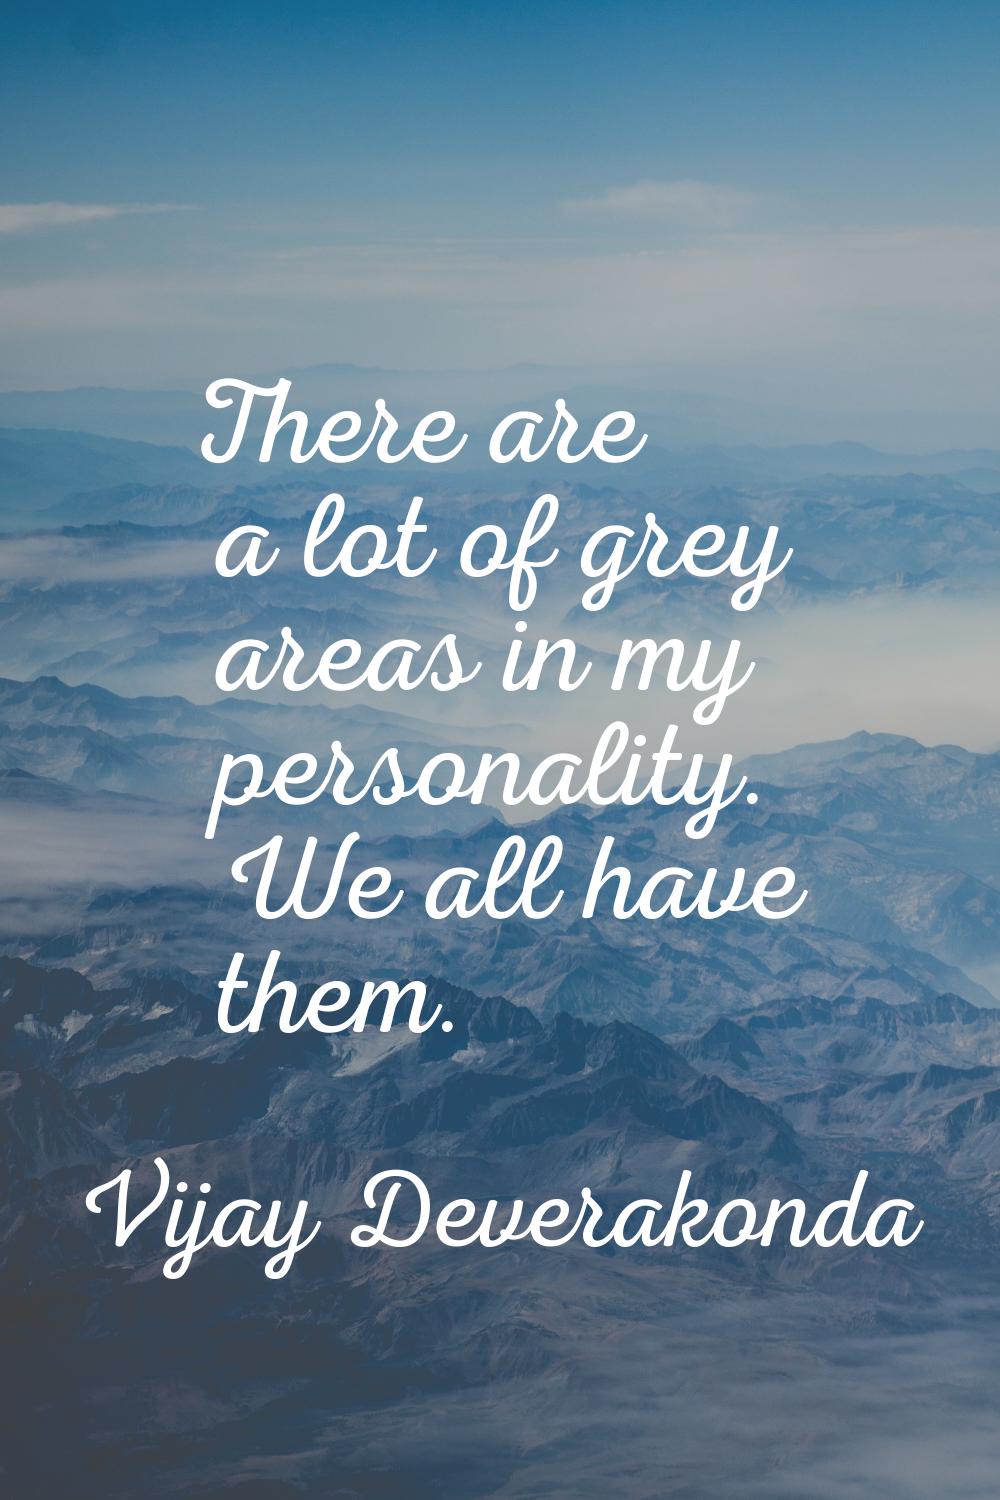 There are a lot of grey areas in my personality. We all have them.